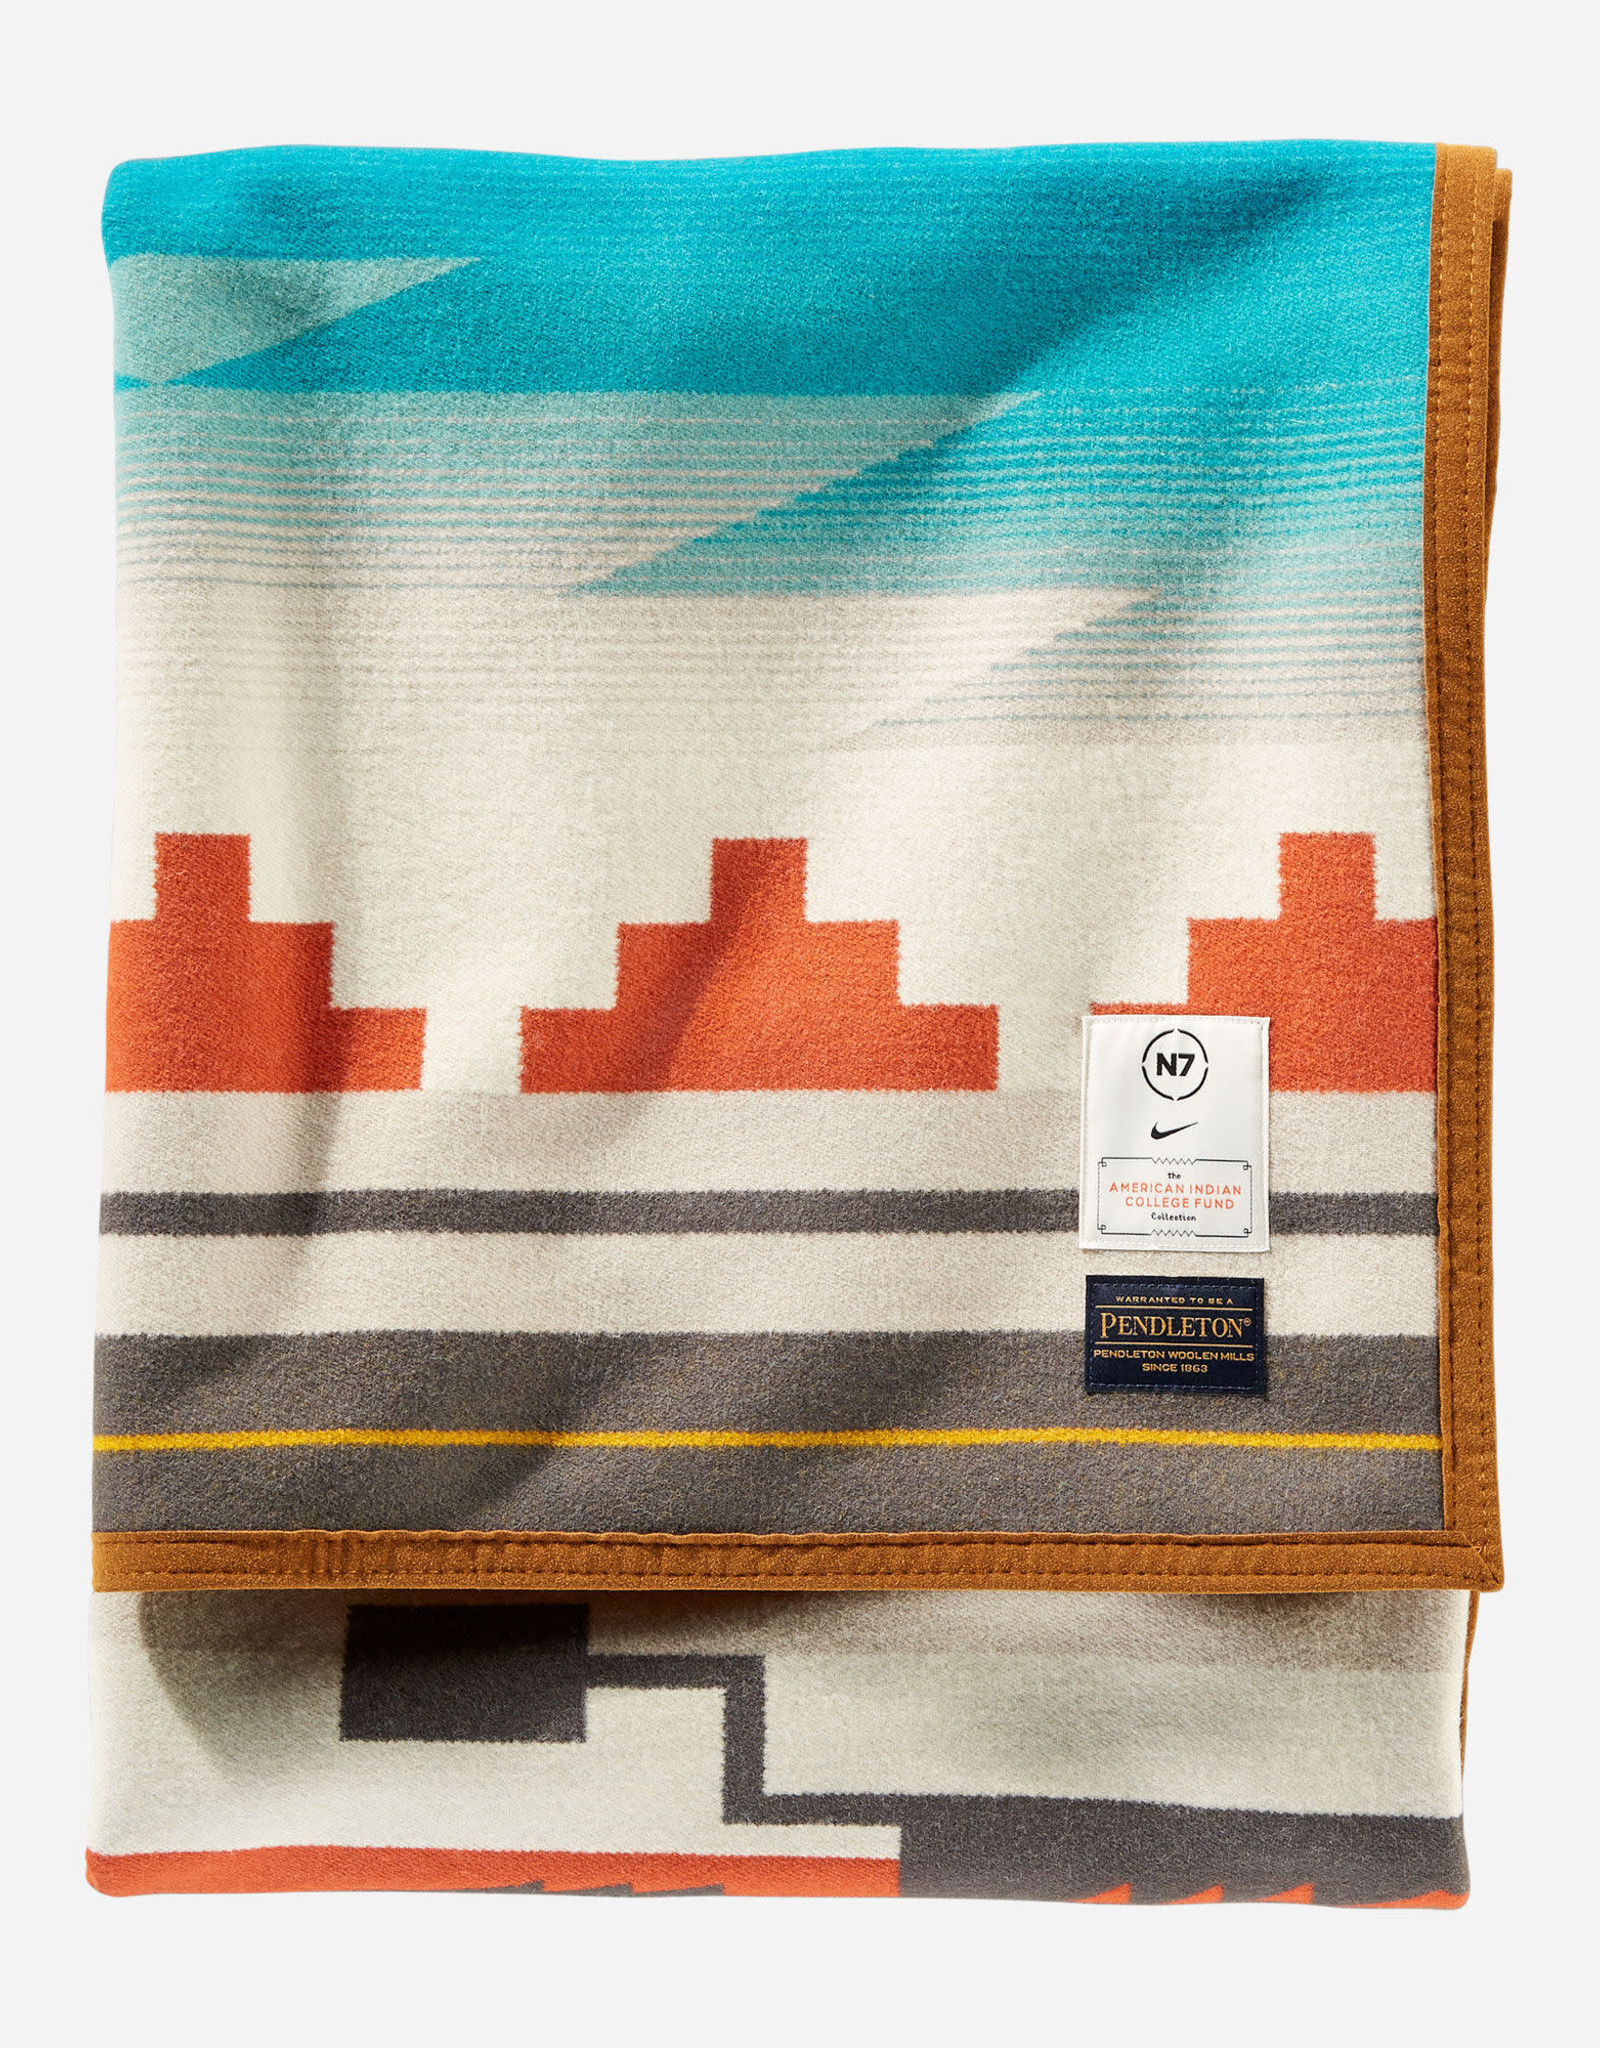 PENDLETON N7 Seven Generations Jacquard Robe Blanket - American Indian College Fund Collection